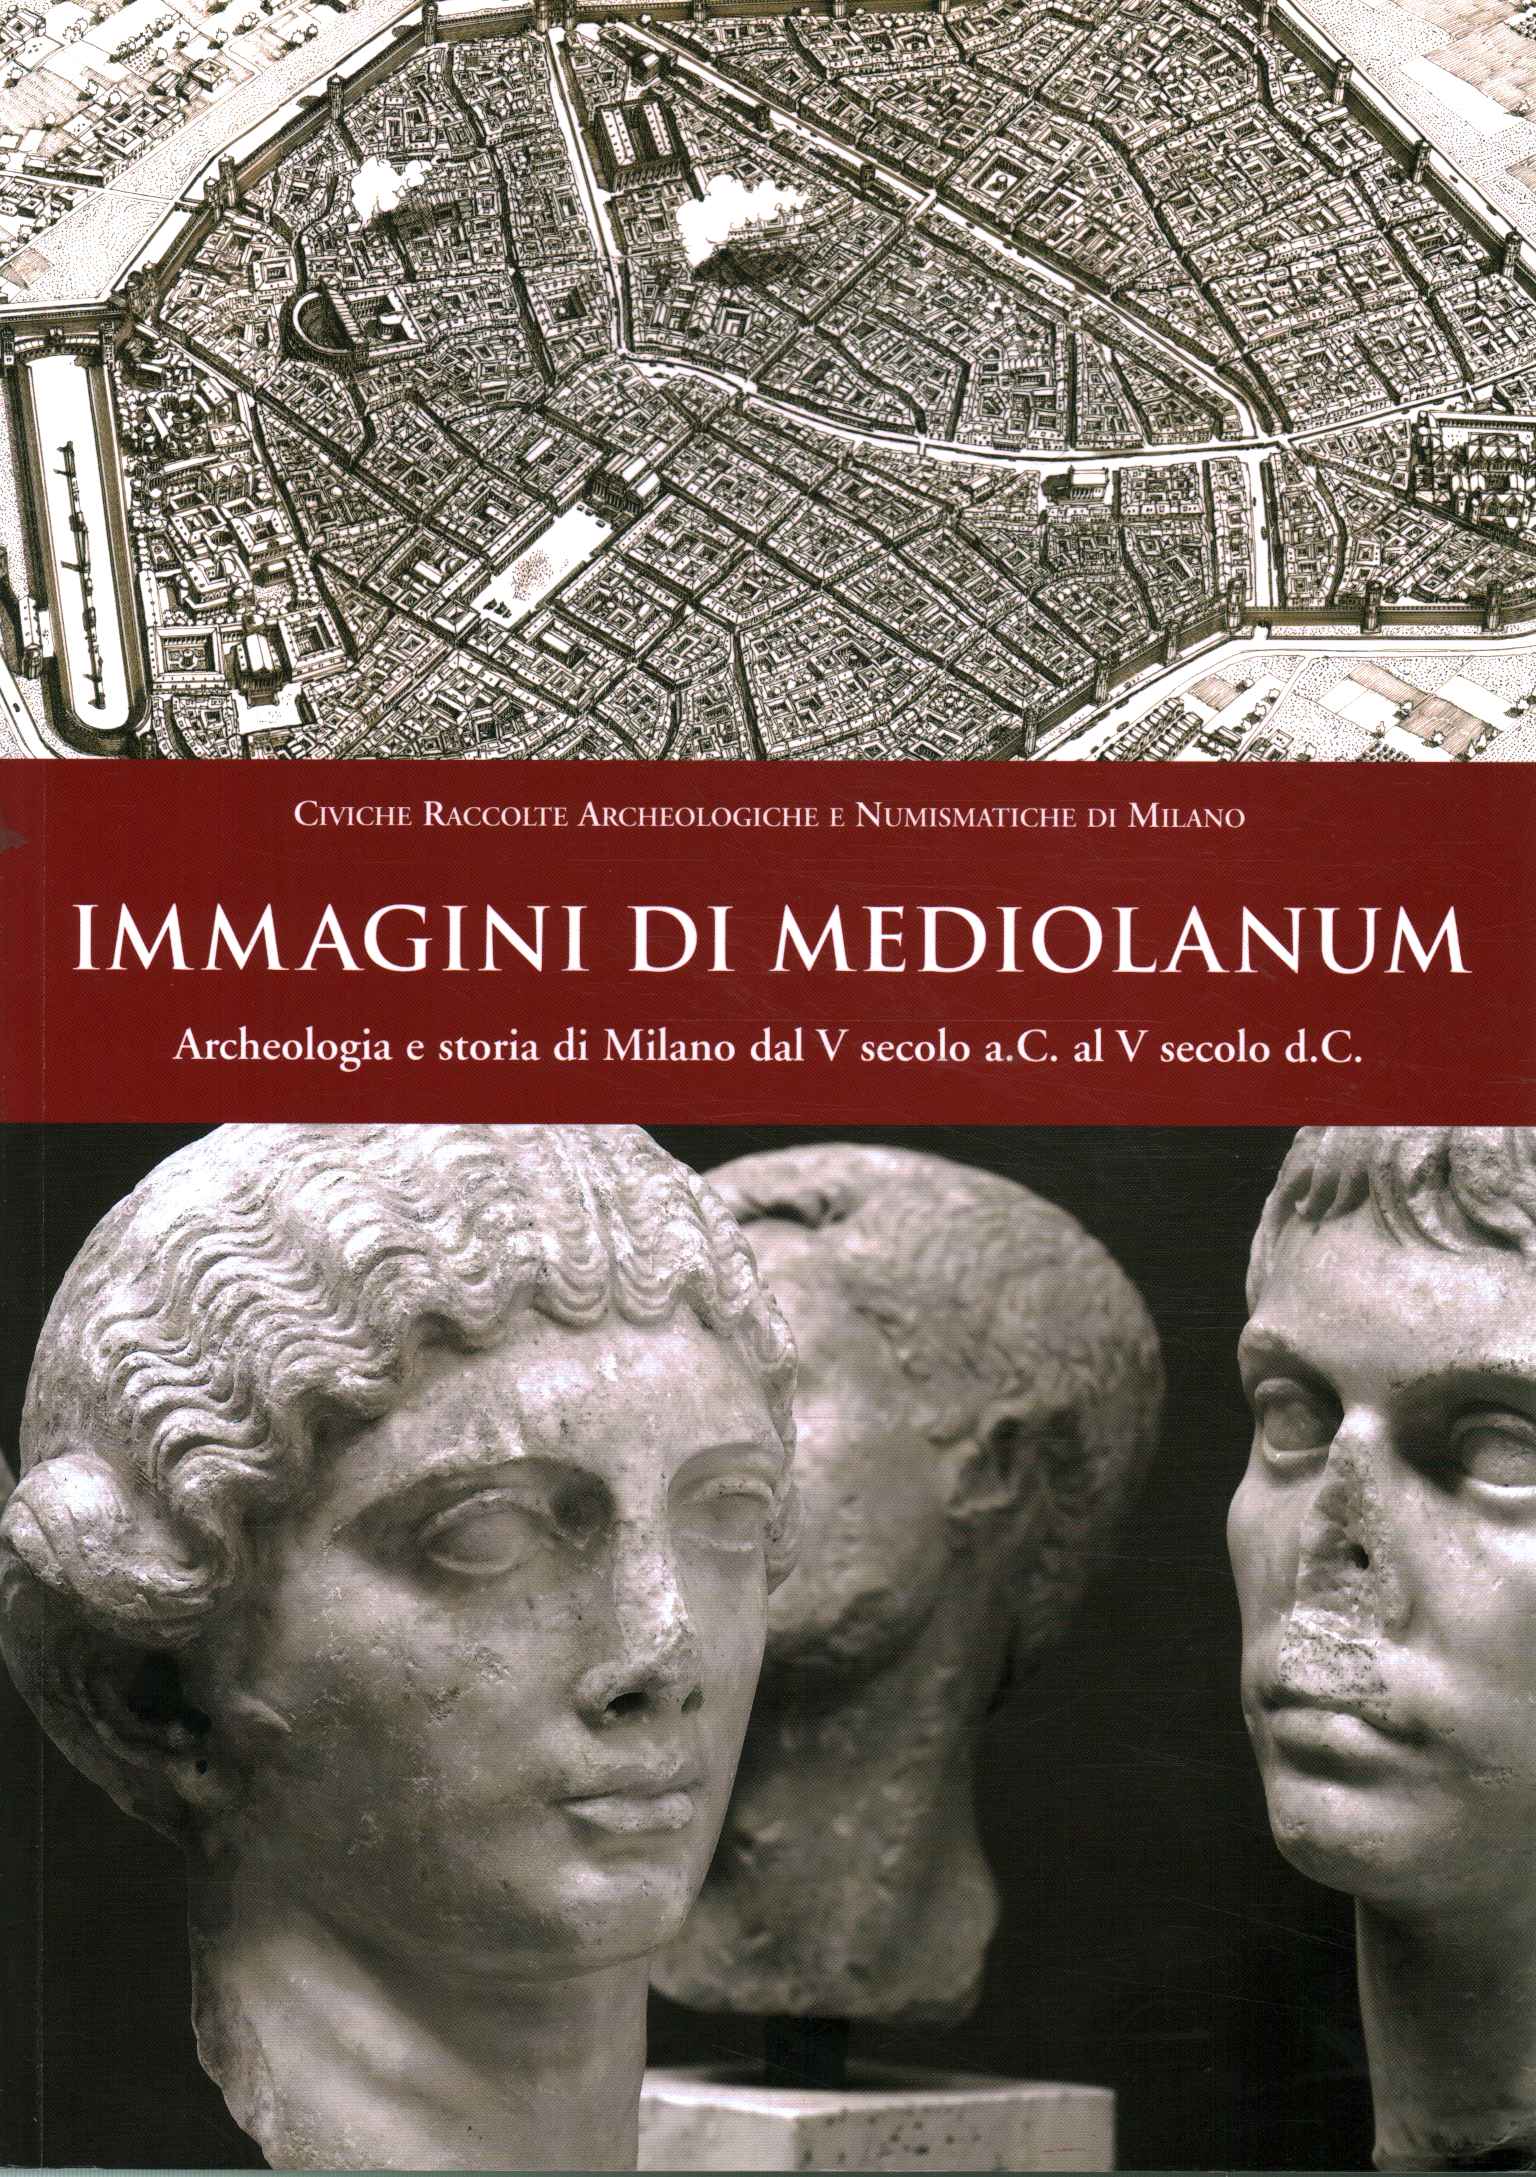 Images by Mediolanum